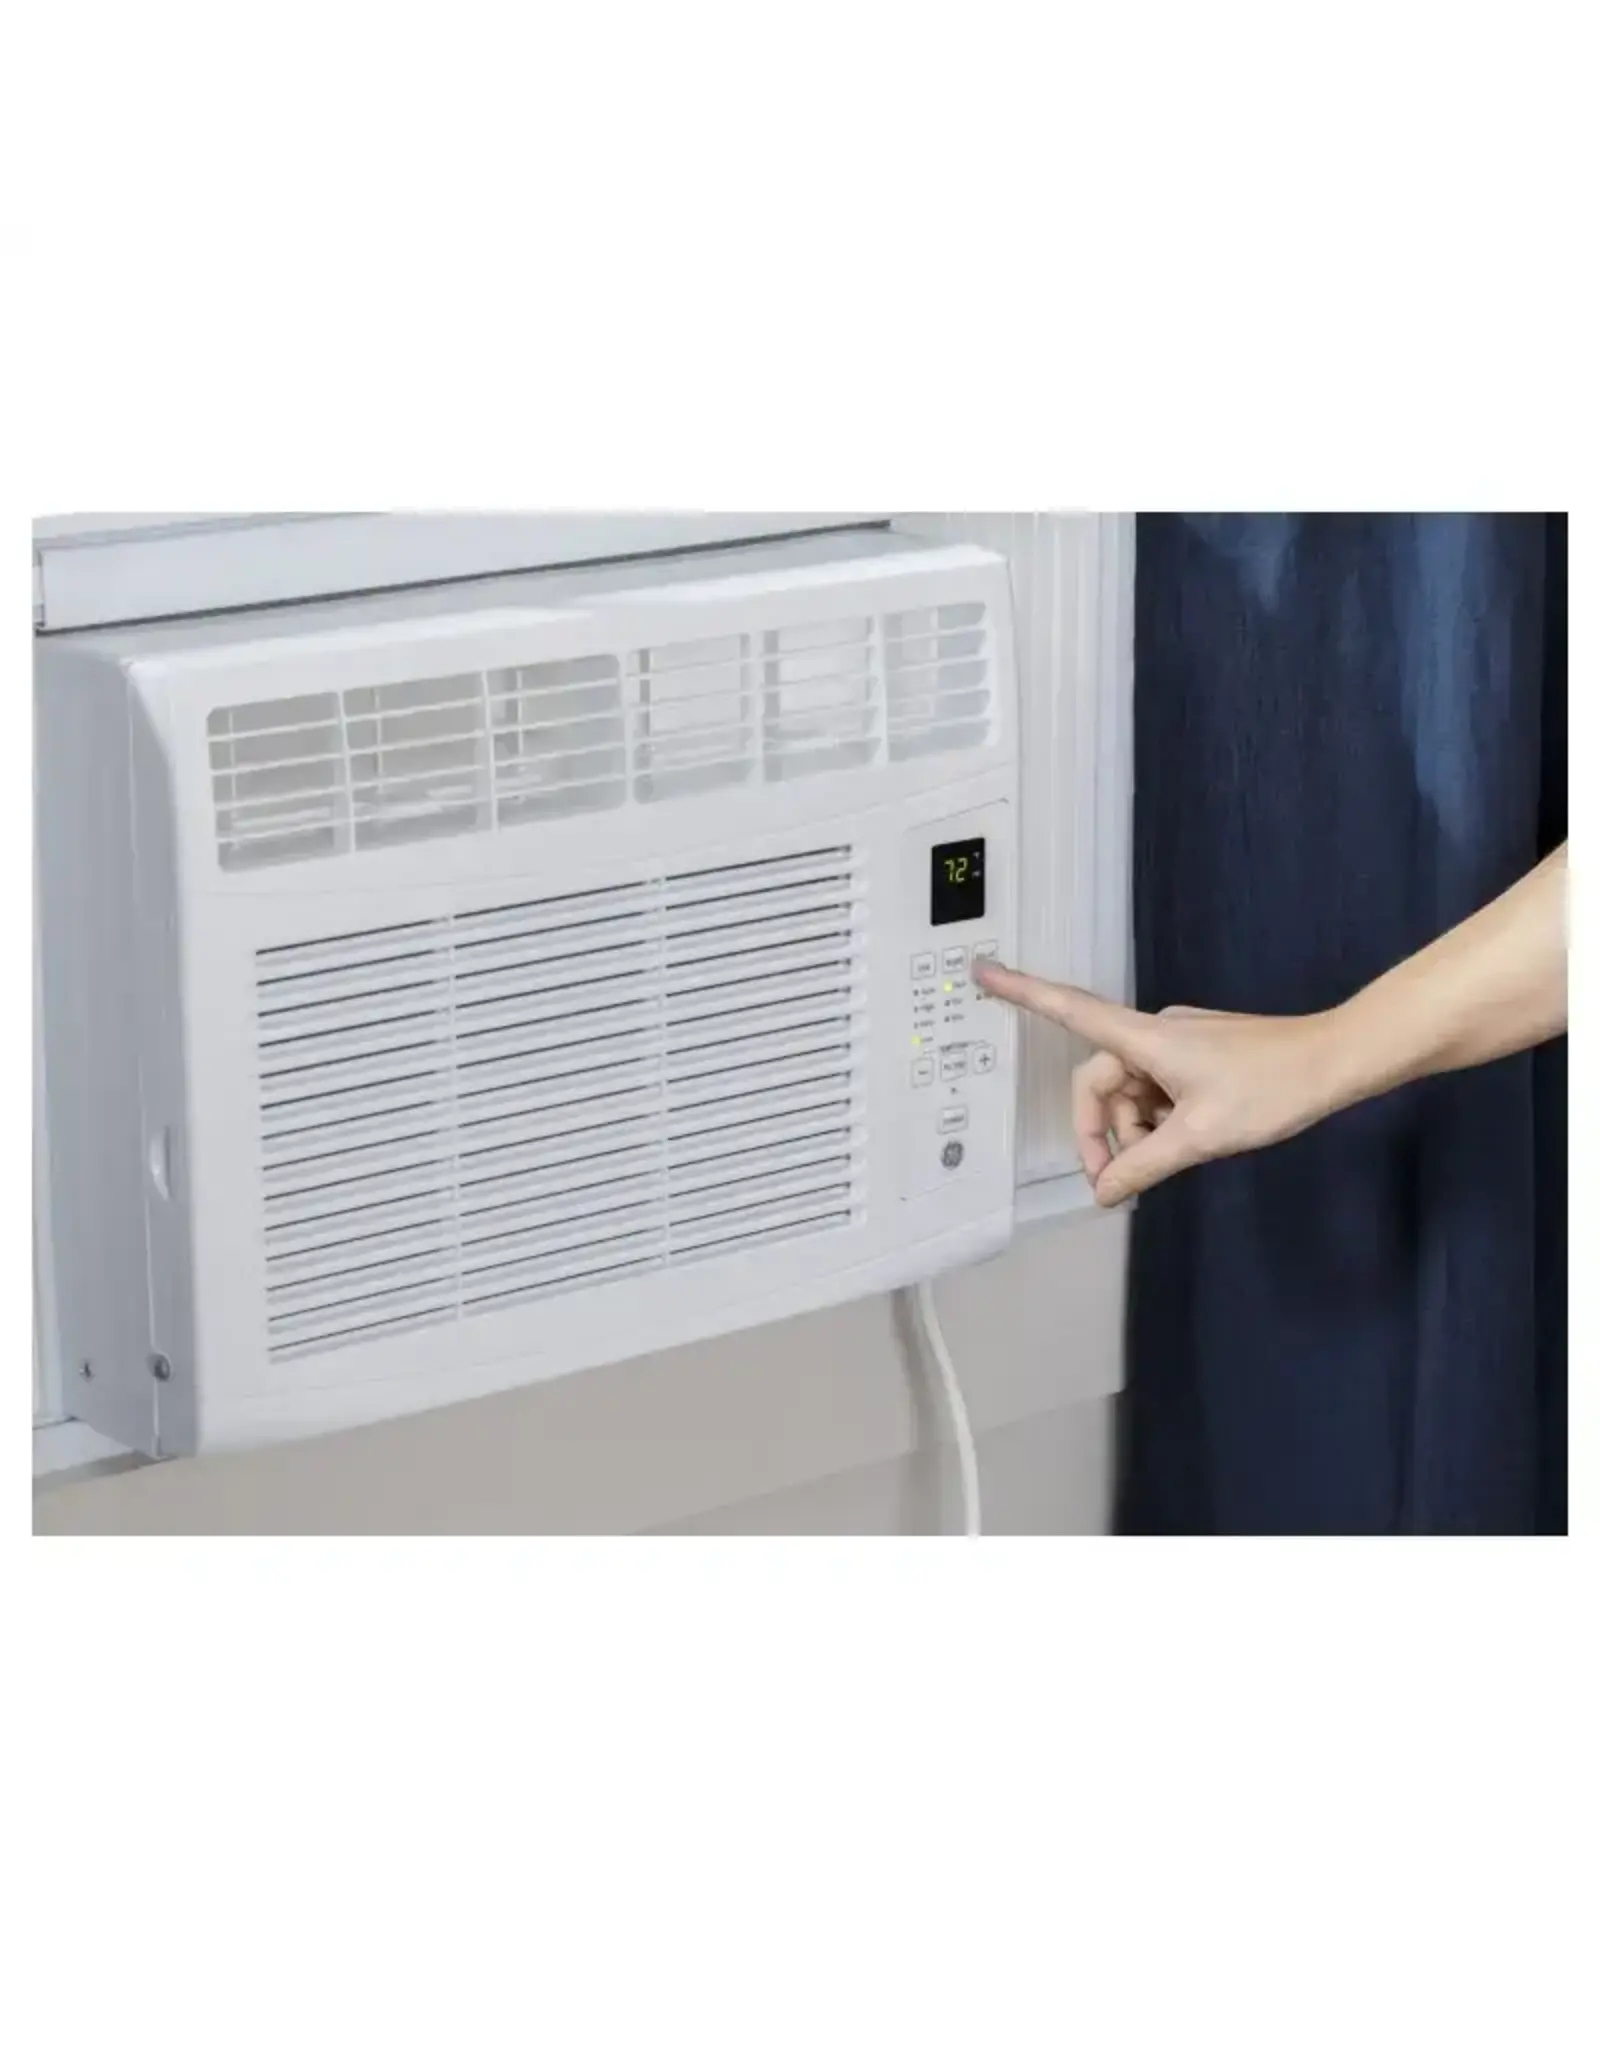 GE AHEE06AC-GE® 6,000 BTU Electronic Window Air Conditioner for Small Rooms up to 250 sq ft.